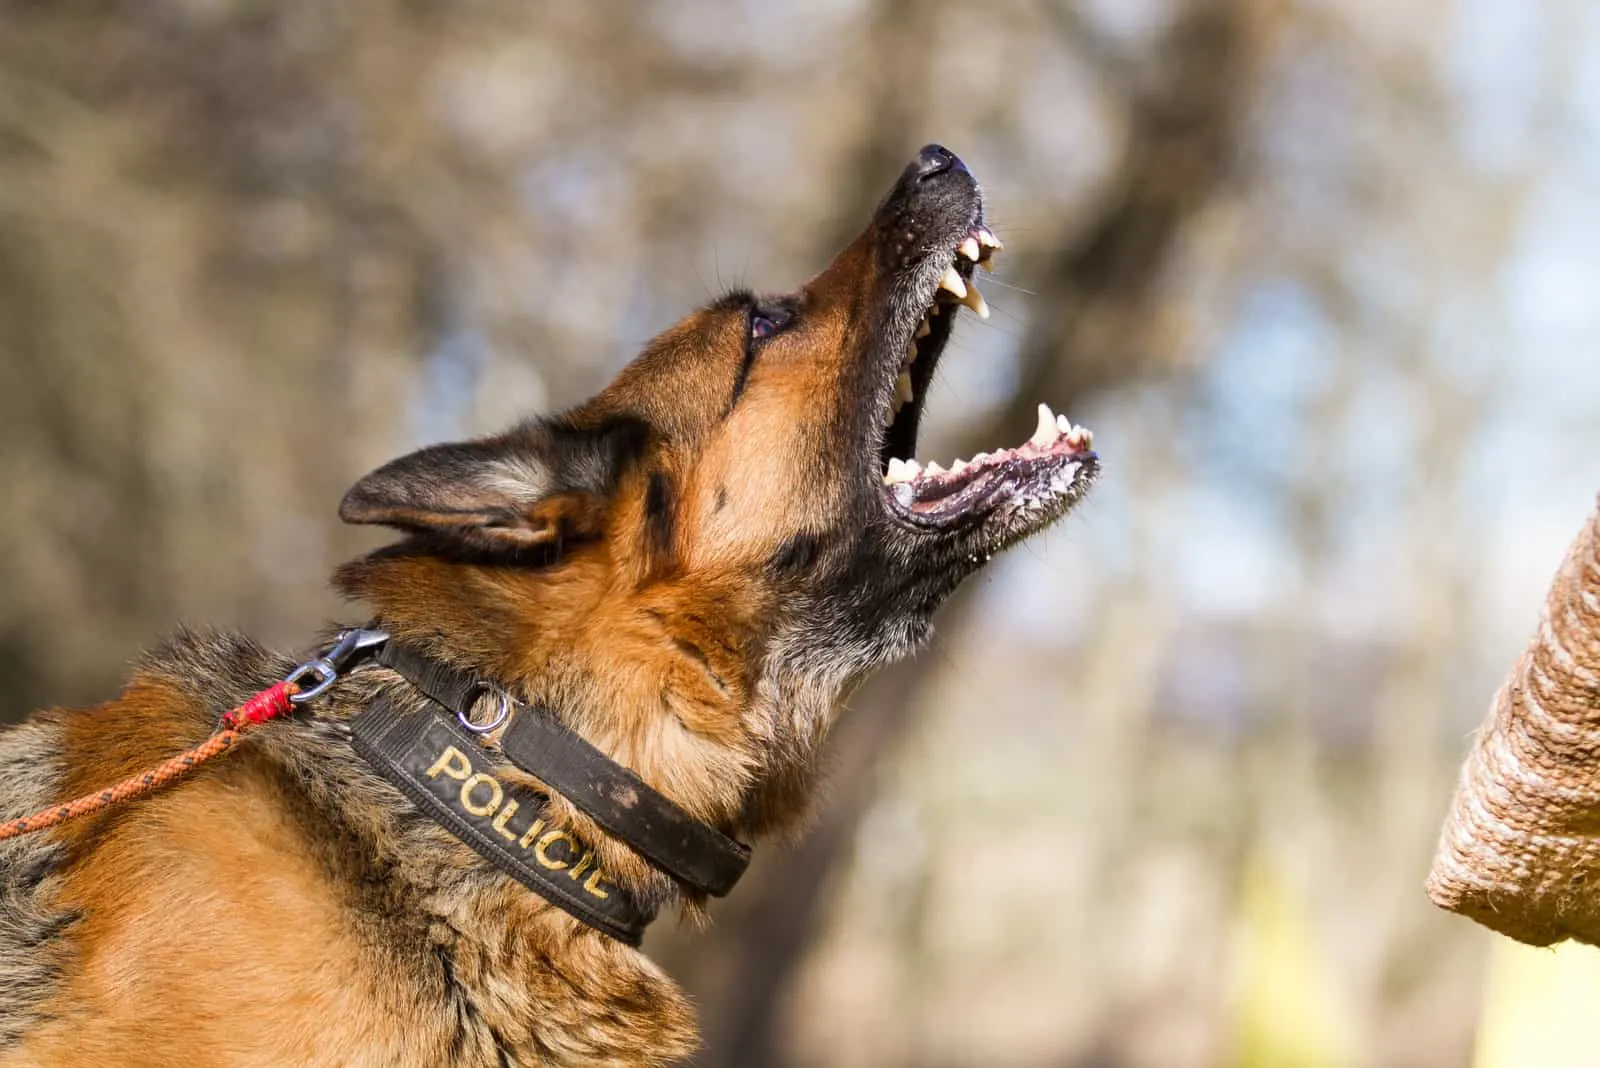 a police dog barks at someone